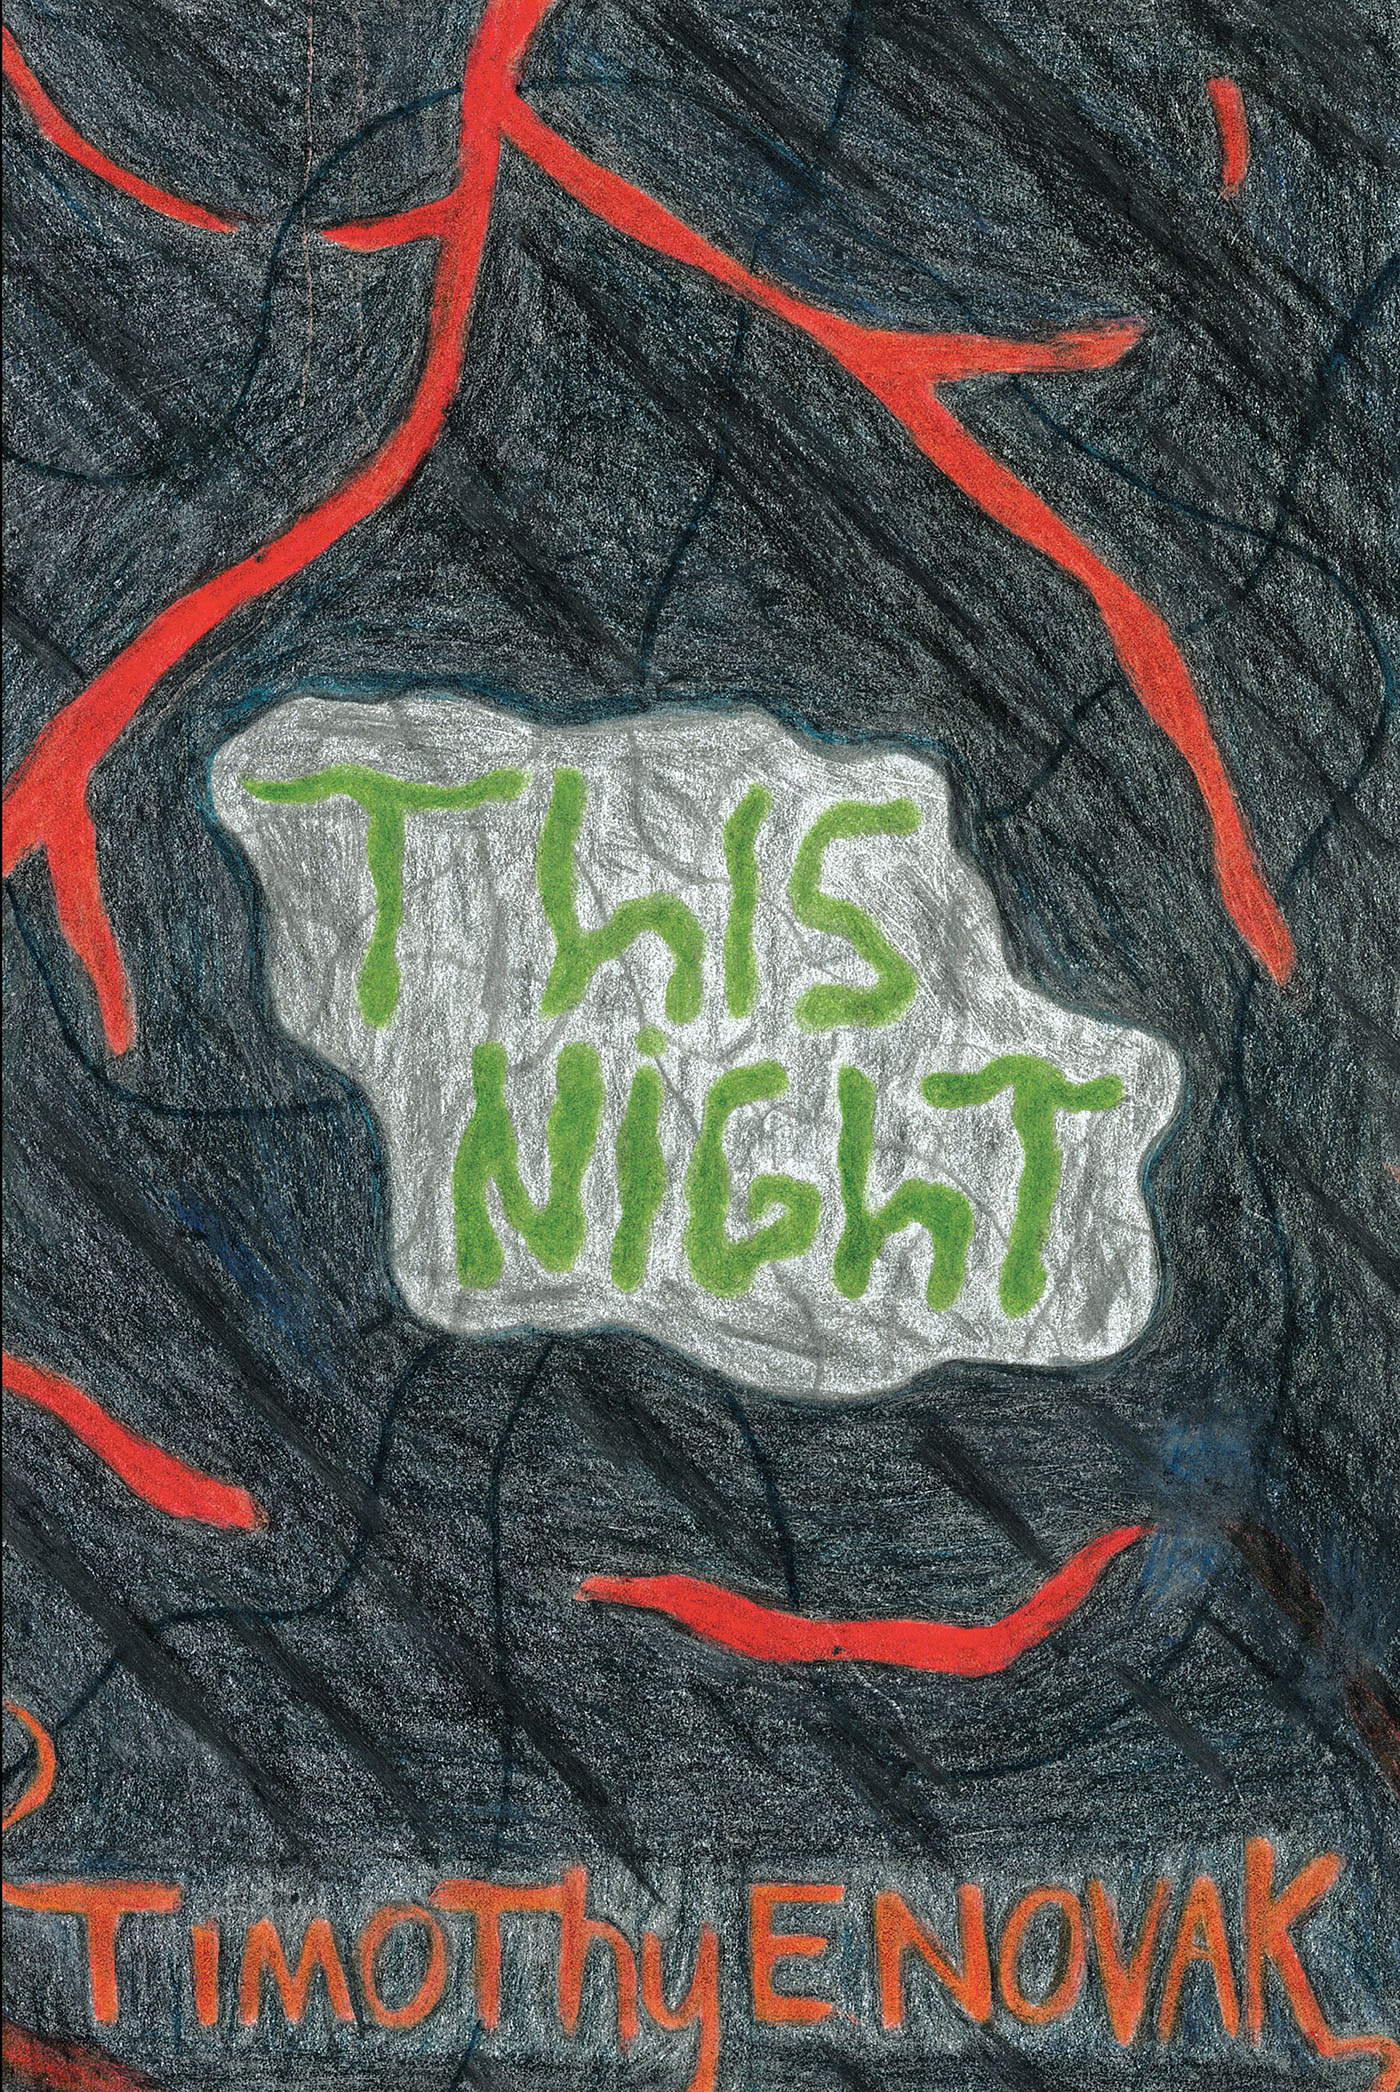 Author Timothy E. Novak’s New Book, "This Night," is a Powerful Novel That Follows the Main Character on an Epic Journey